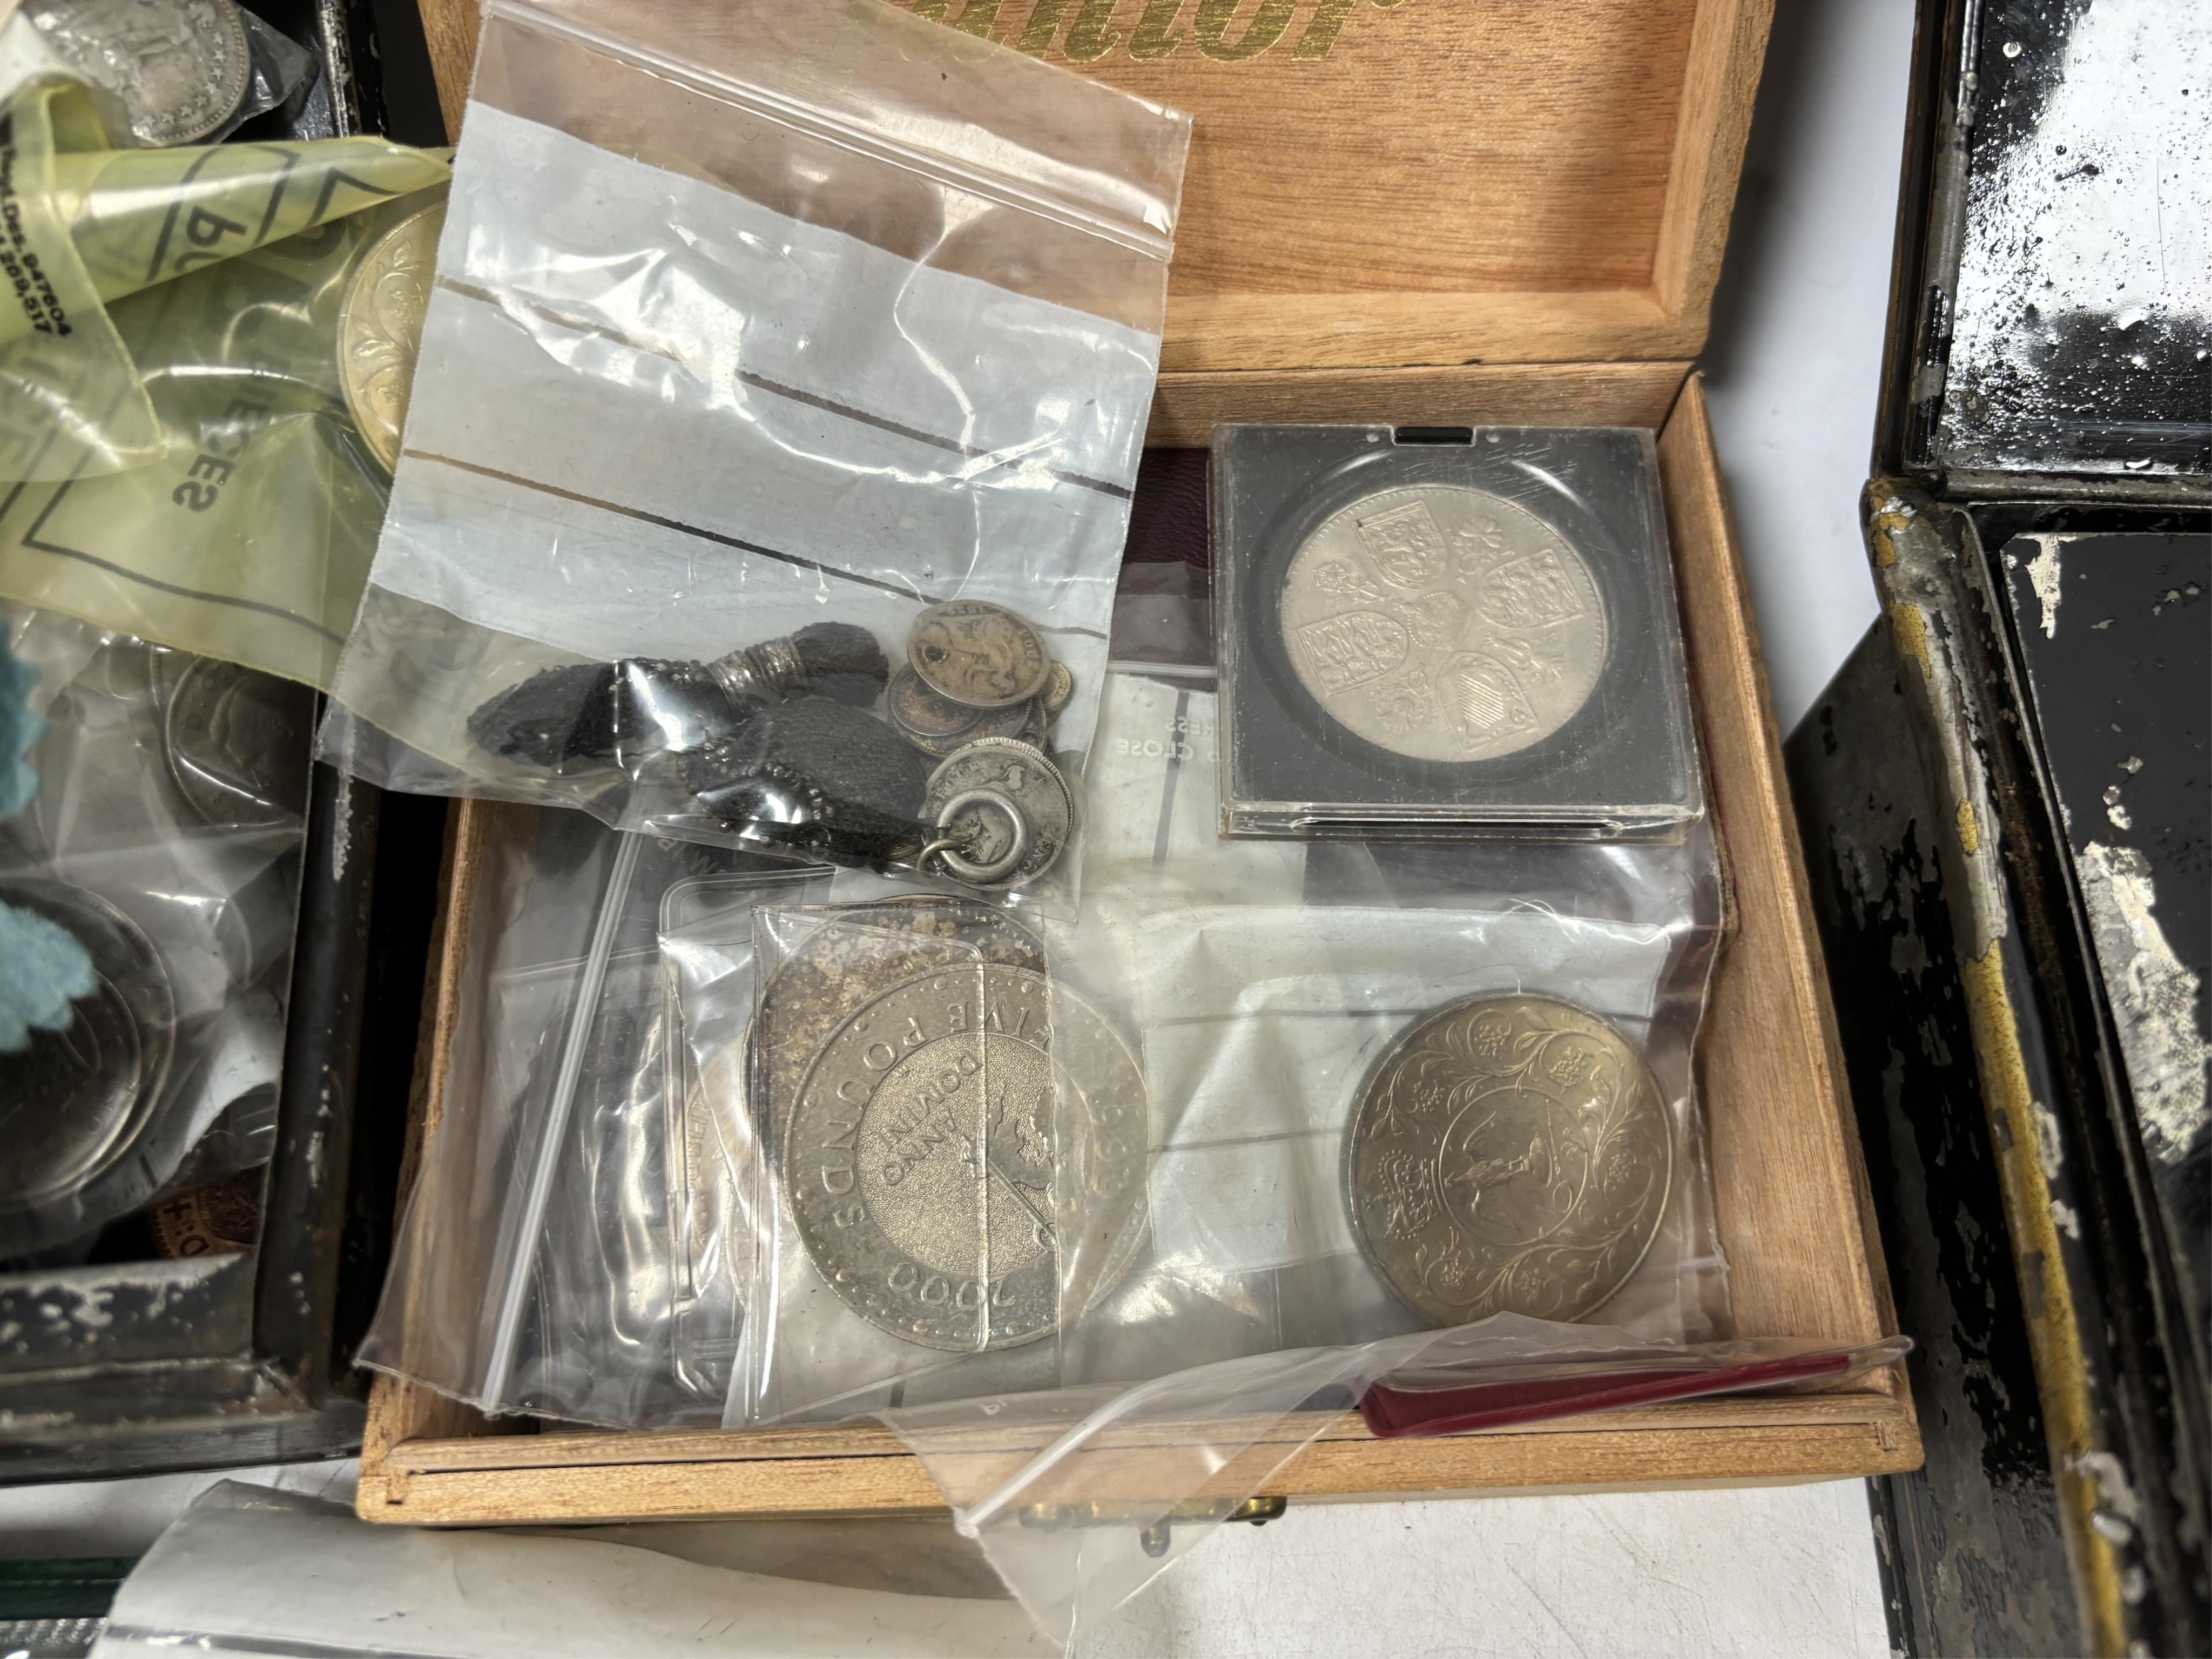 Mostly British coins, 19th/20th century to include two Victoria double florins 1889, good VF, two - Image 4 of 5